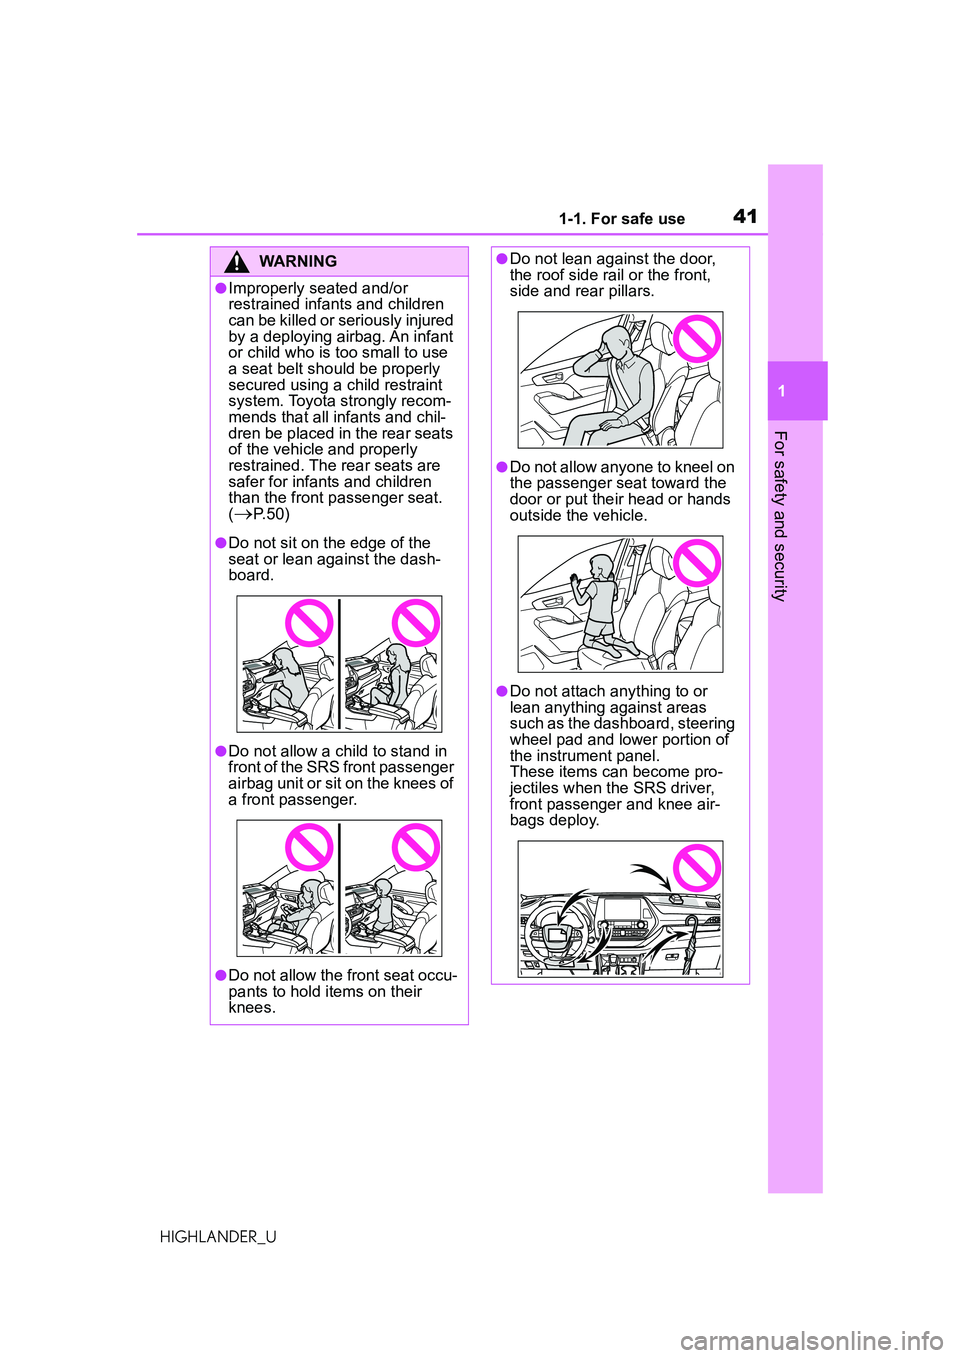 TOYOTA HIGHLANDER 2021  Owners Manual (in English) 411-1. For safe use
1
For safety and security
HIGHLANDER_U
WARNING
●Improperly seated and/or 
restrained infants and children 
can be killed or seriously injured 
by a deploying airbag. An infant 
o